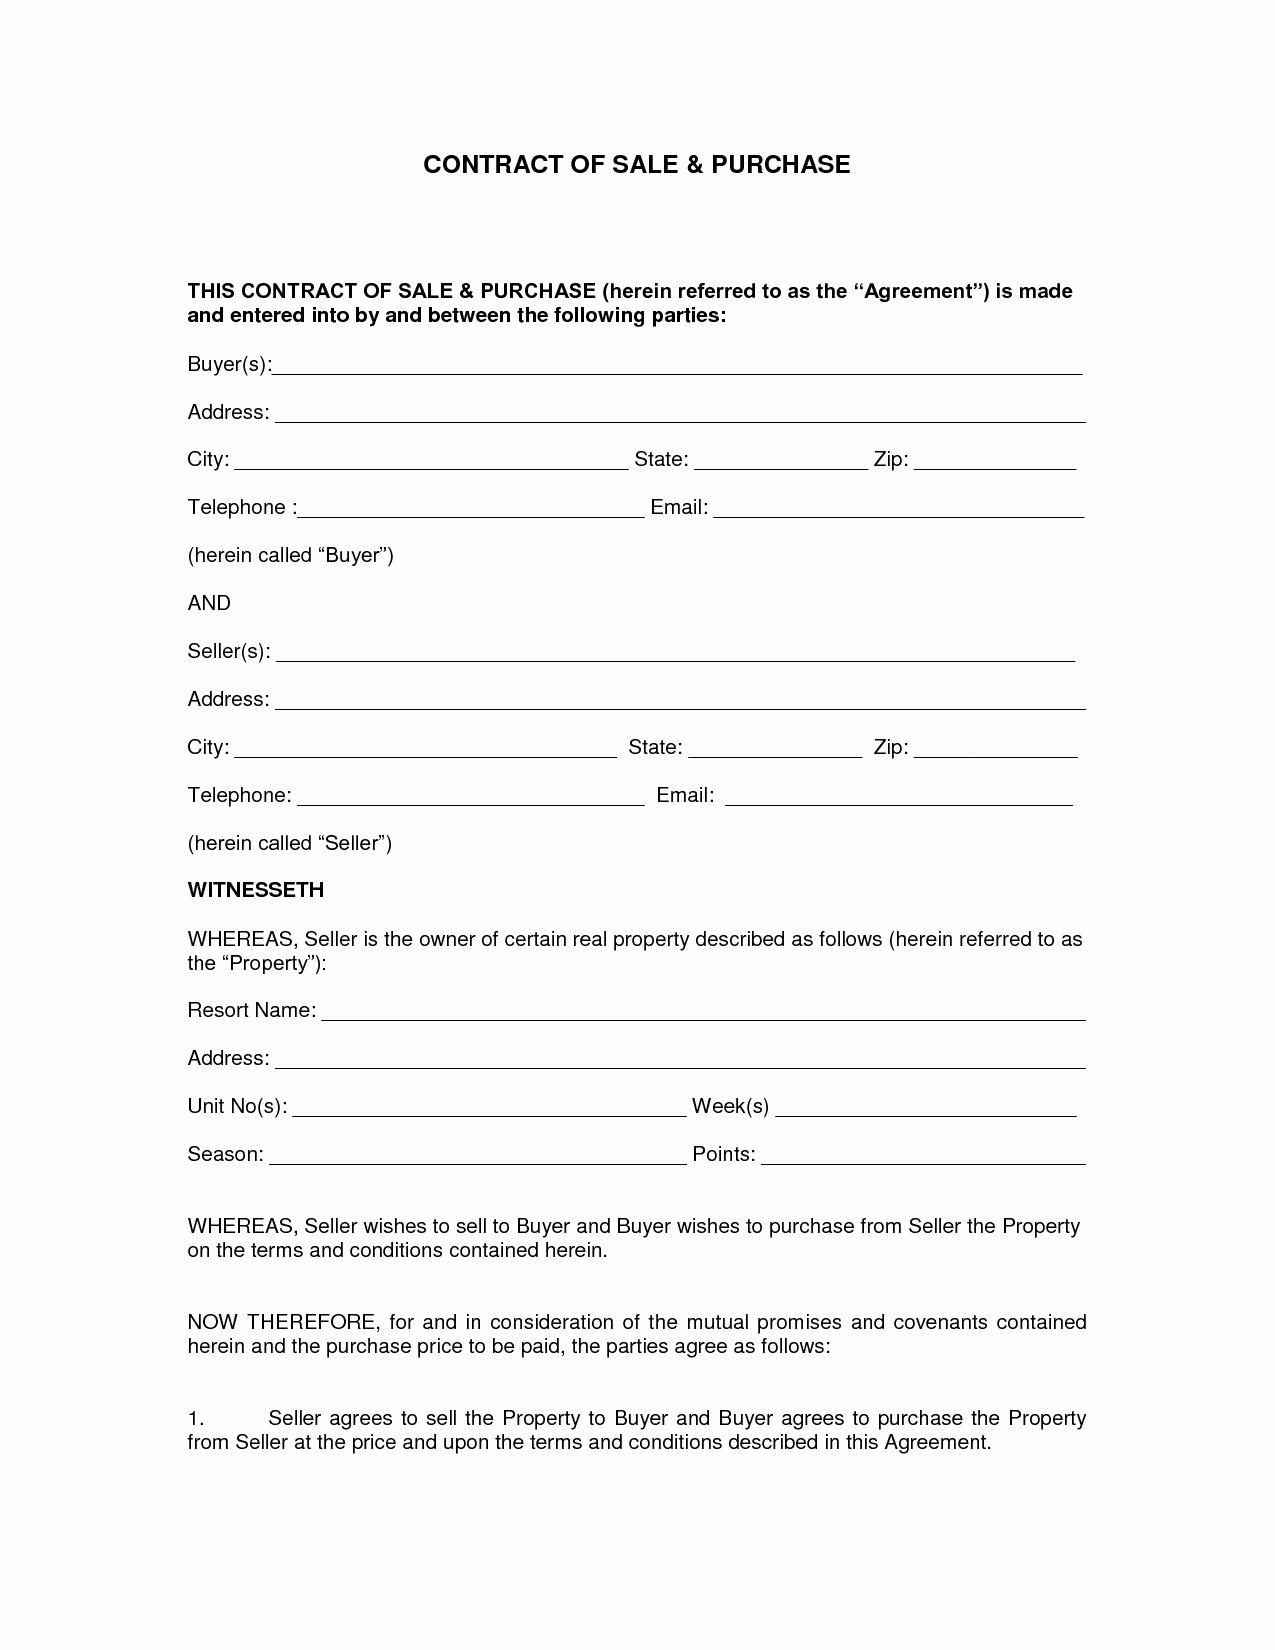 motorcycle purchase agreement template